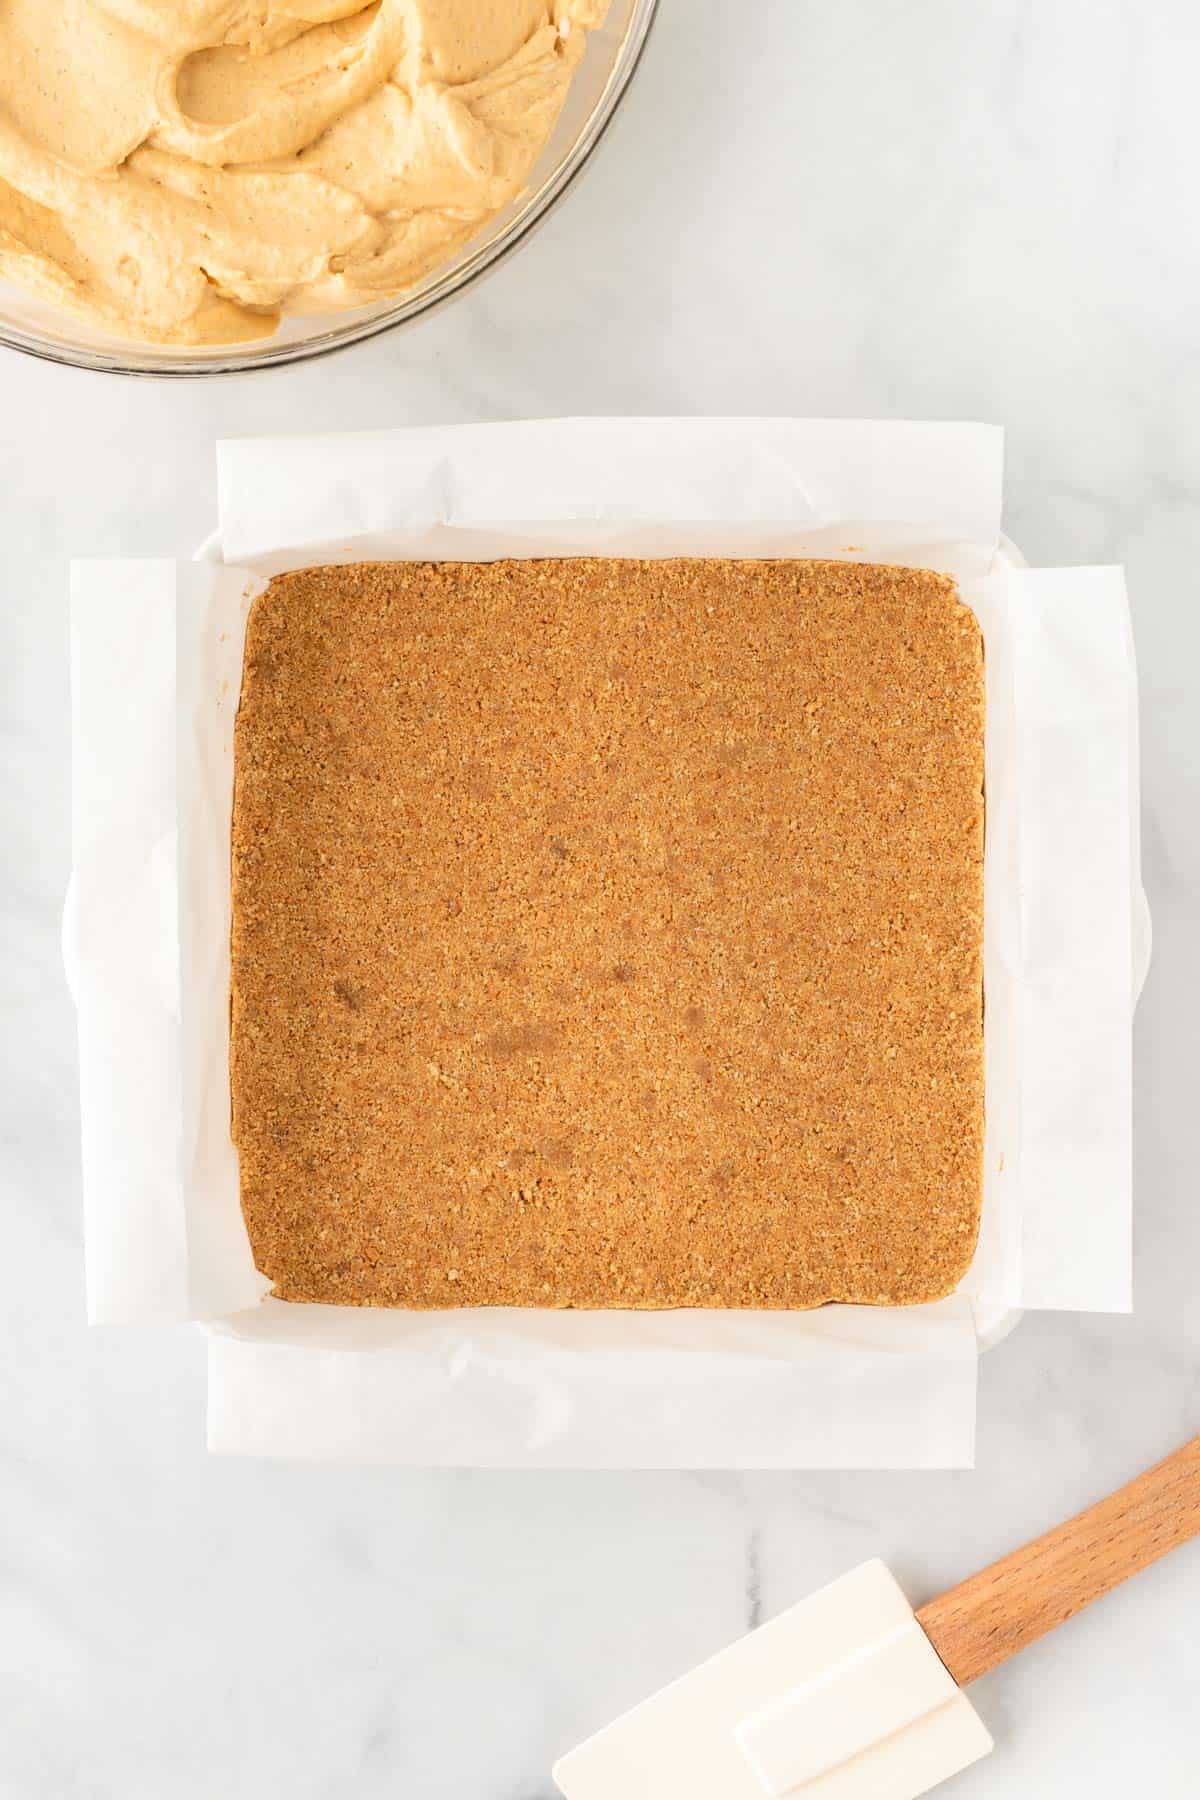 graham cracker crust pressed down into an 8 by 8 baking dish lined with parchment paper